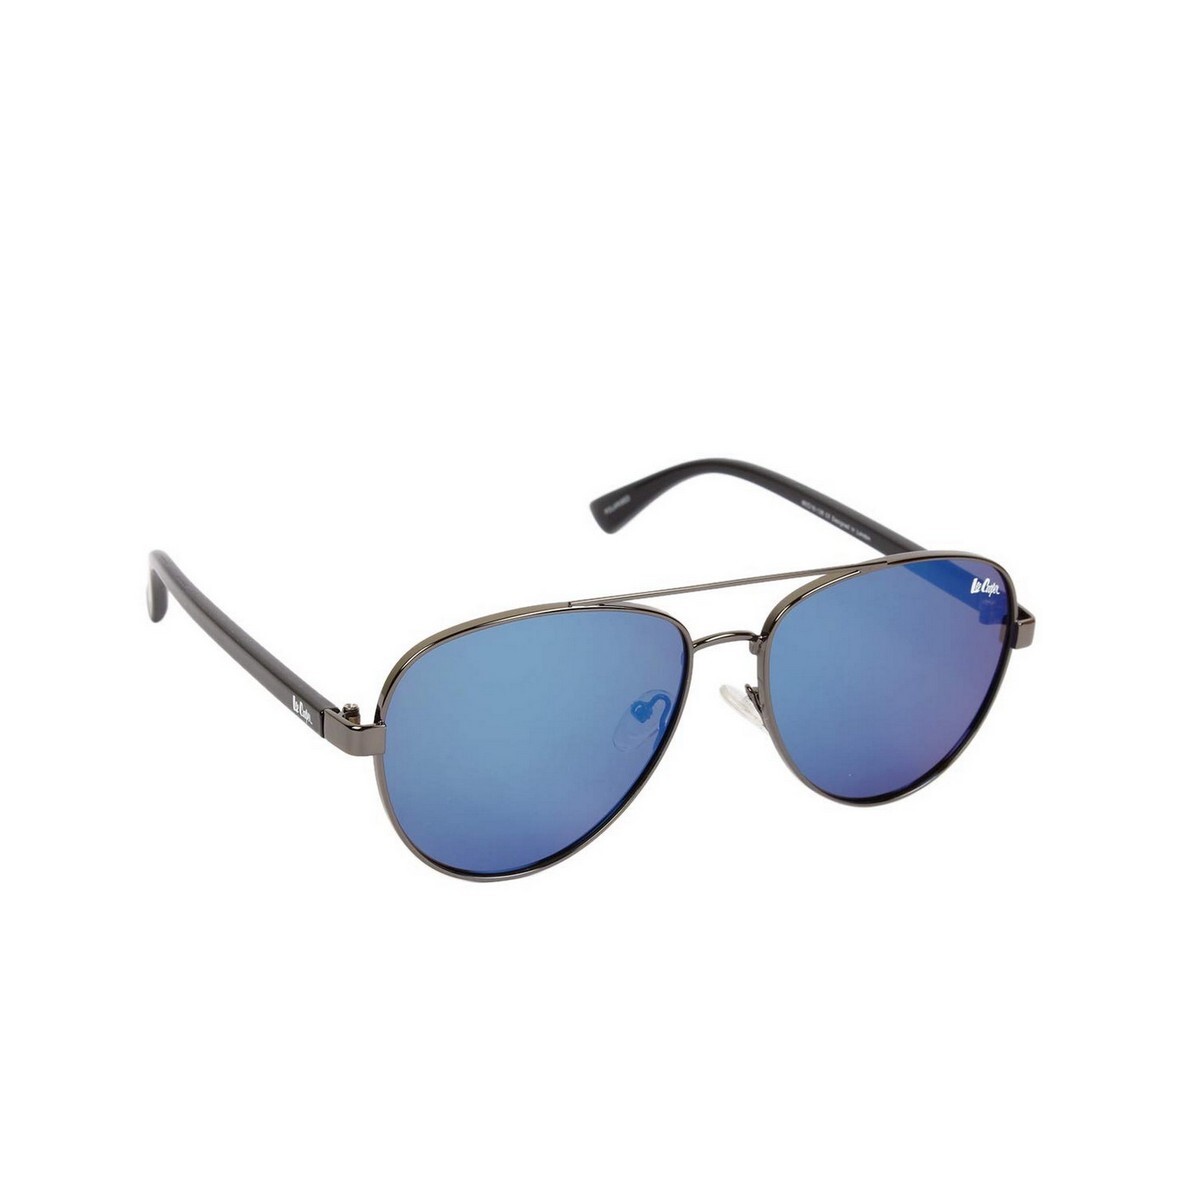 Lee Cooper Male Silver Frame With Blue Lens Sunglass